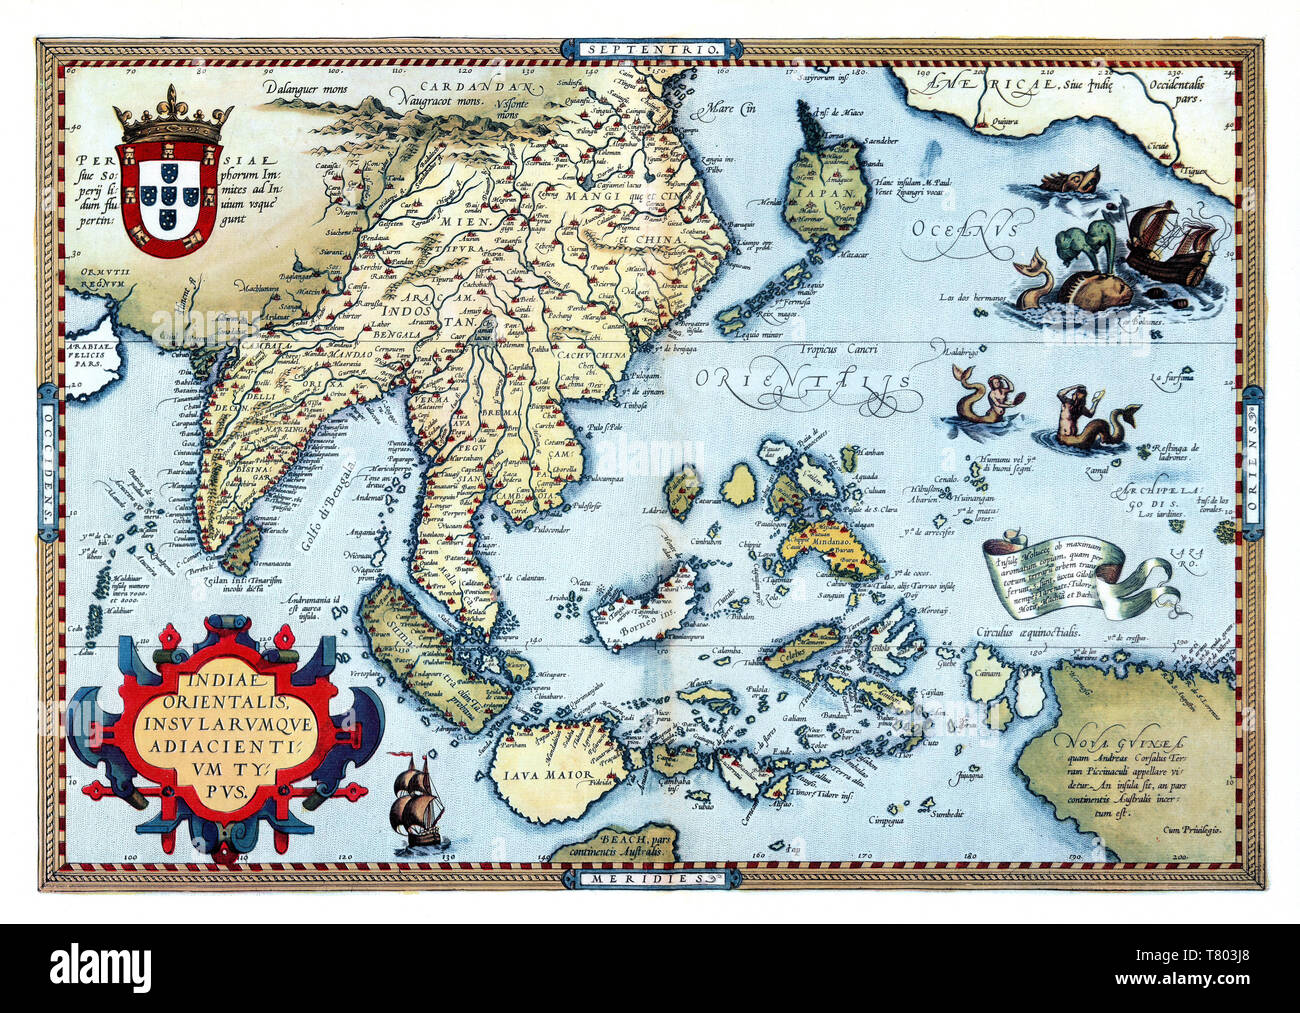 16th century india map Cut Out Stock Images & Pictures - Alamy